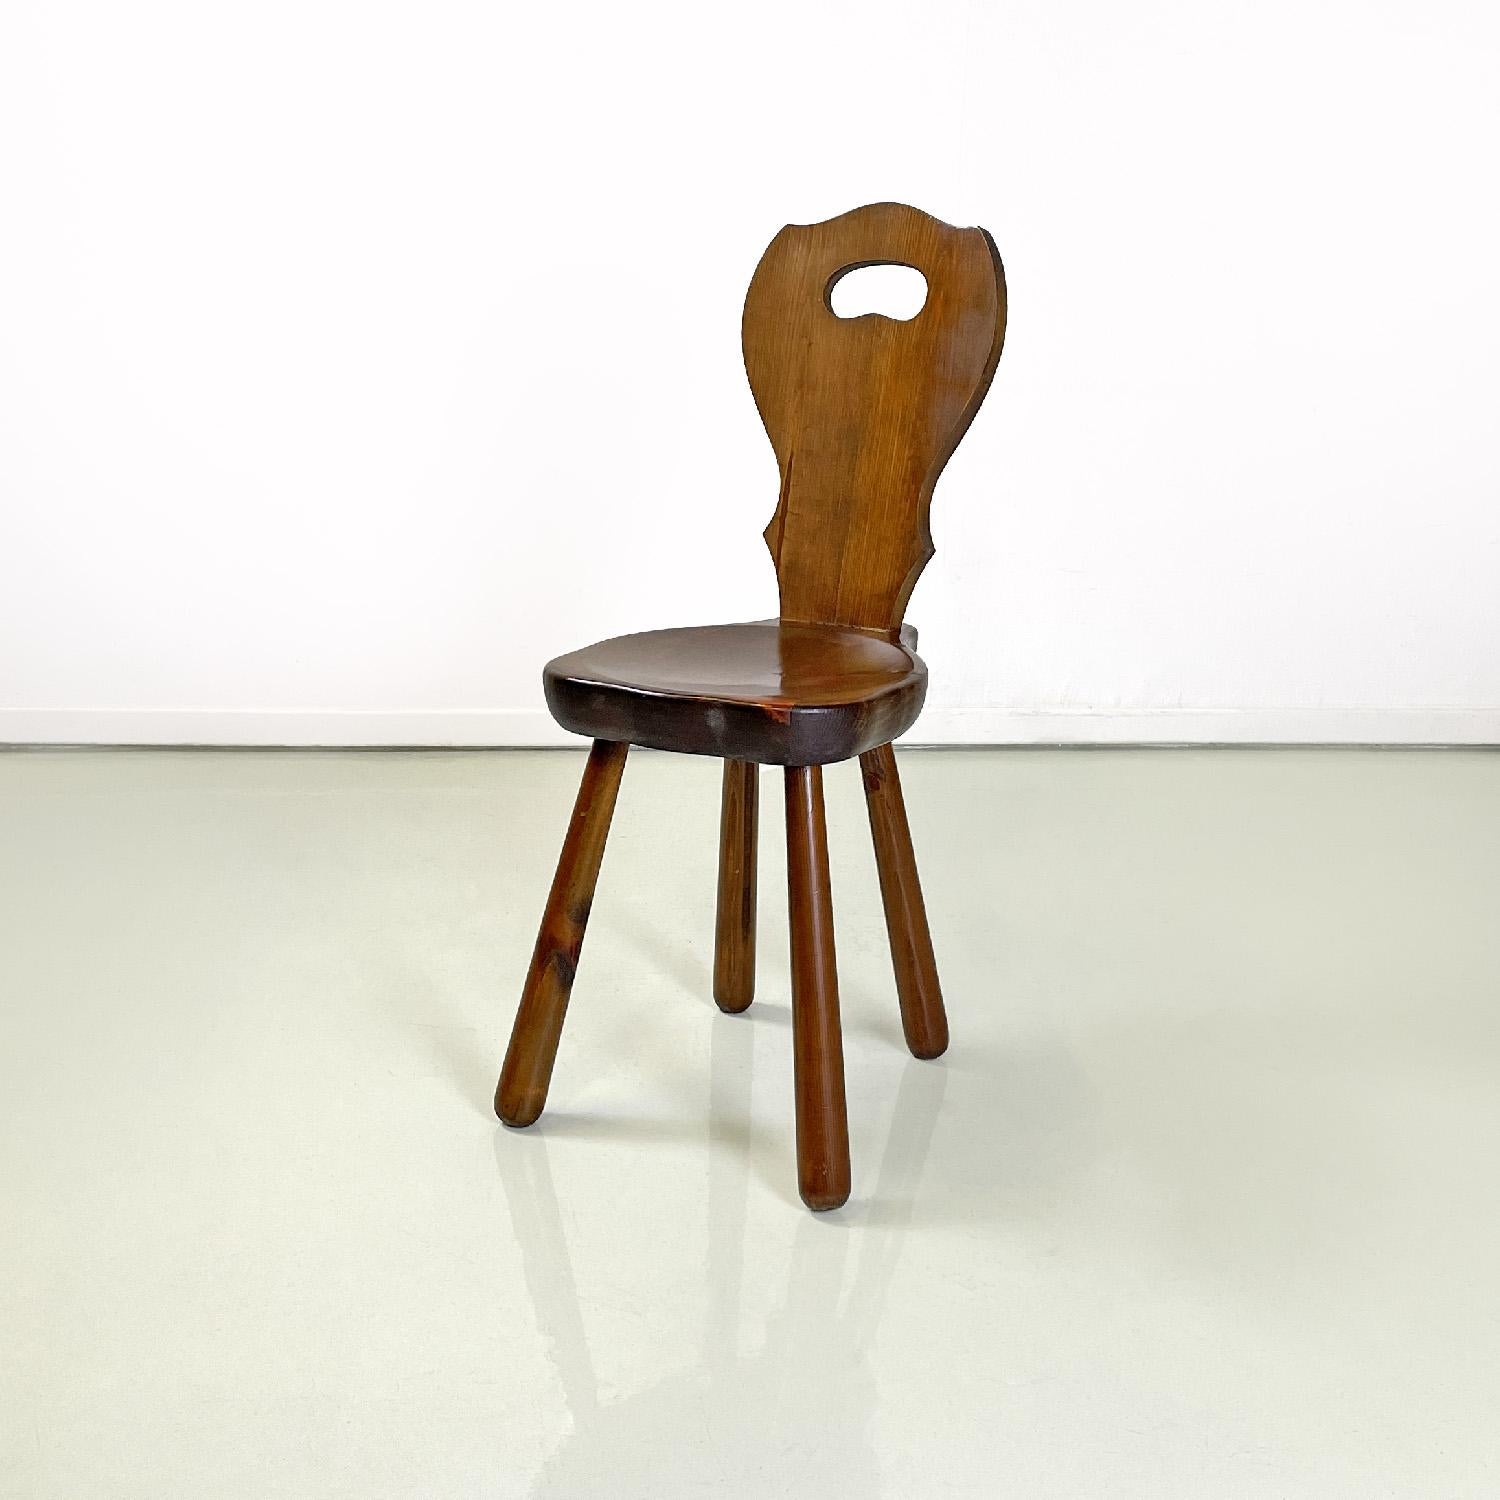 Italian Art Deco wooden chair with rounded profiles, 1940s
Wooden chair in Art Deco style with slightly shaped rounded seat. The backrest has rounded and pointed profiles to create a decoration, in the upper part there is a hole that can be used as